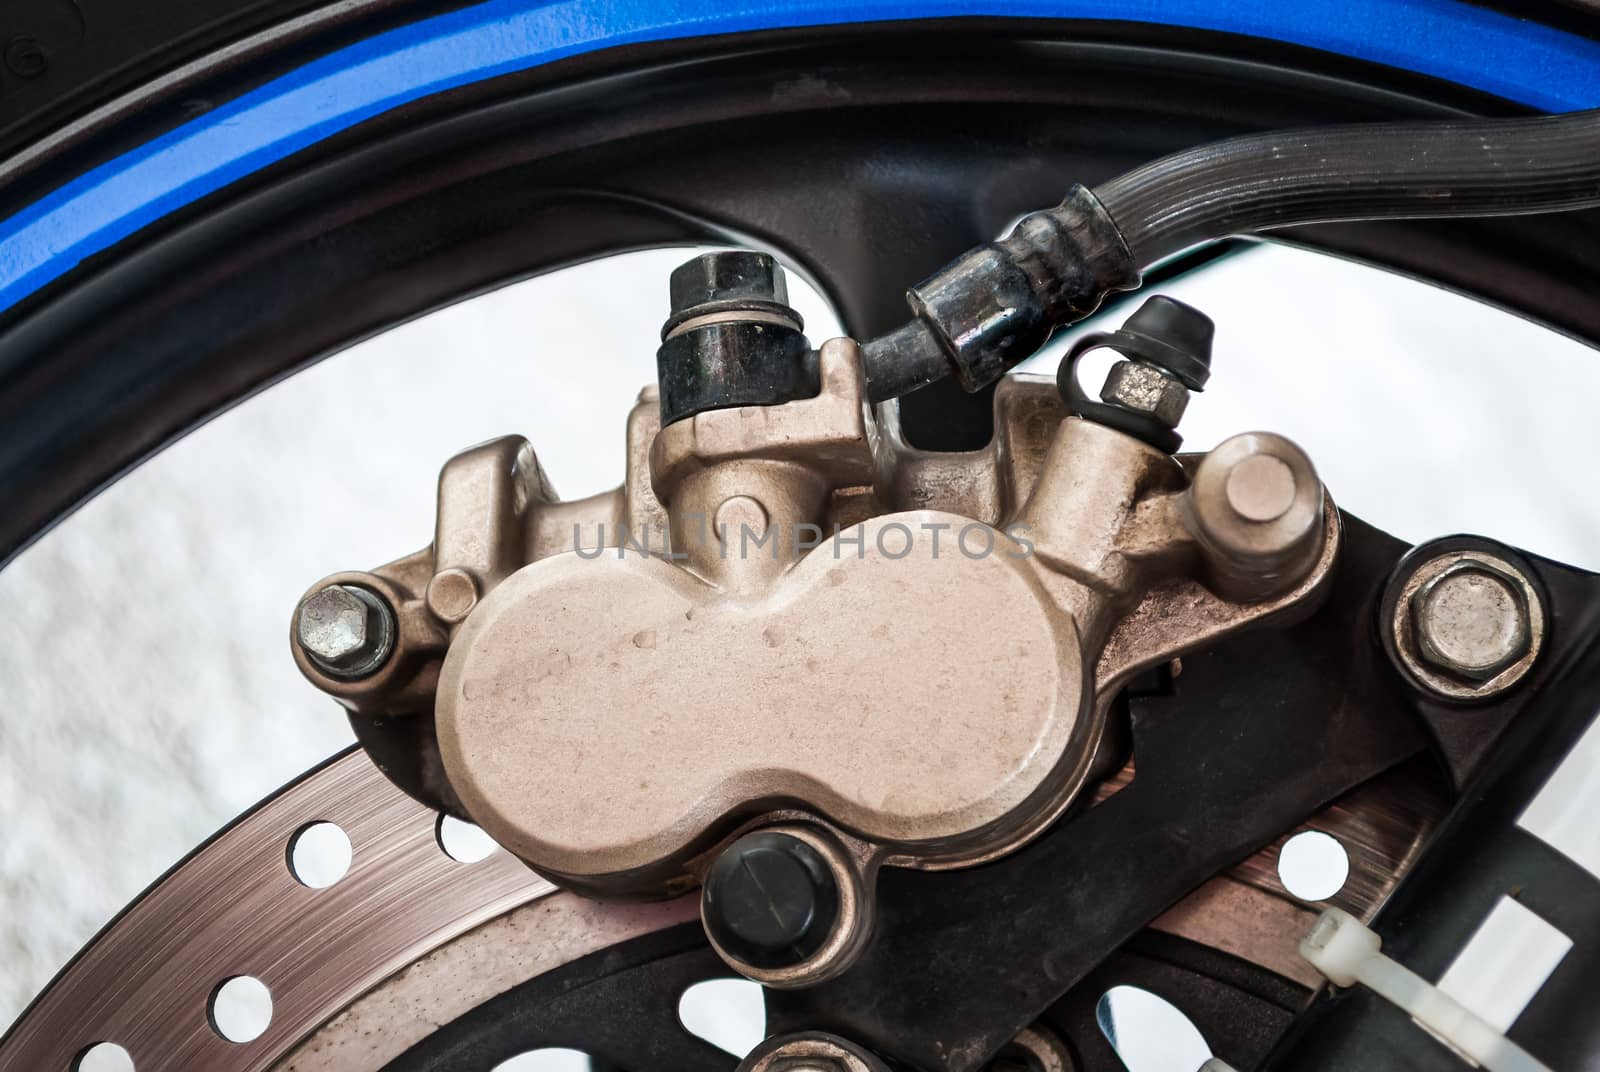 Dirty Sport Bike���s Disc Brake with Calipers by noneam